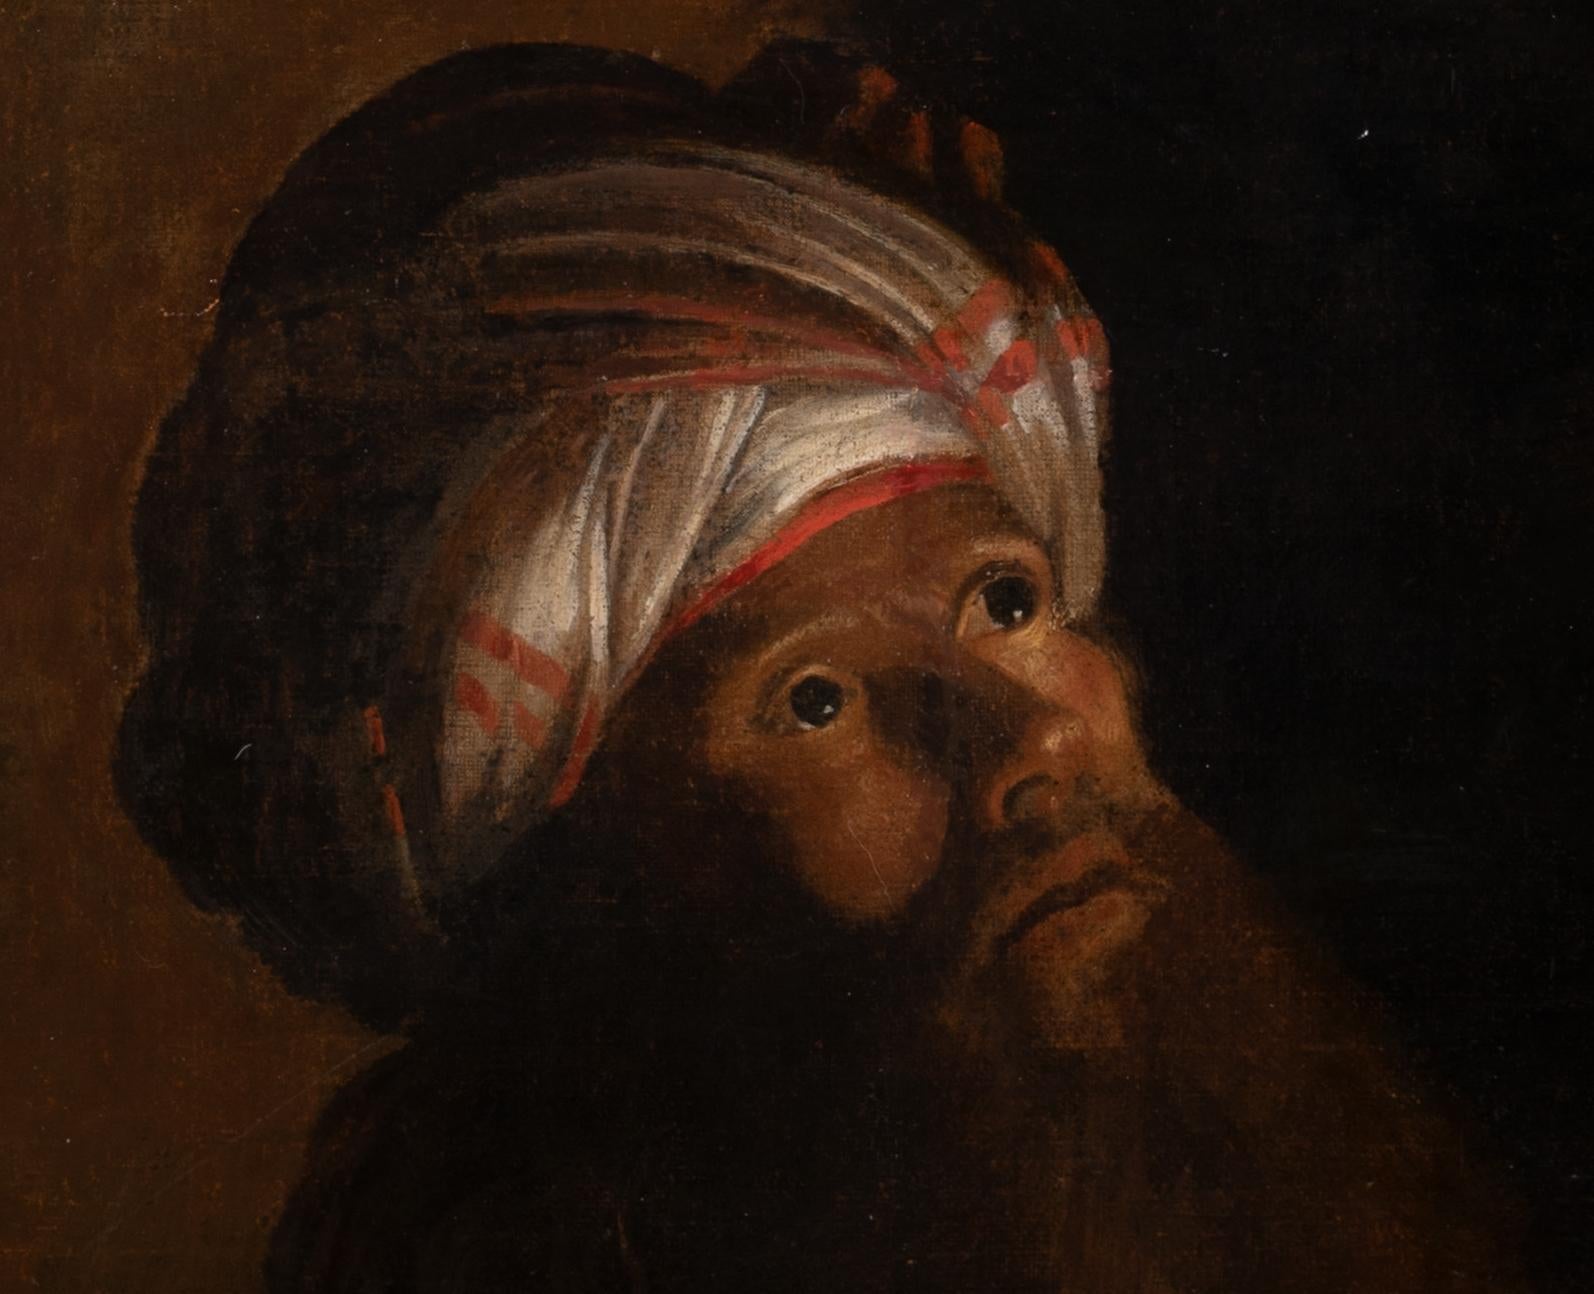 Portrait Of A Man Wearing An Arab Turkish Man Smoking a Pipe, 17th Century   - Black Portrait Painting by Adam De Coster